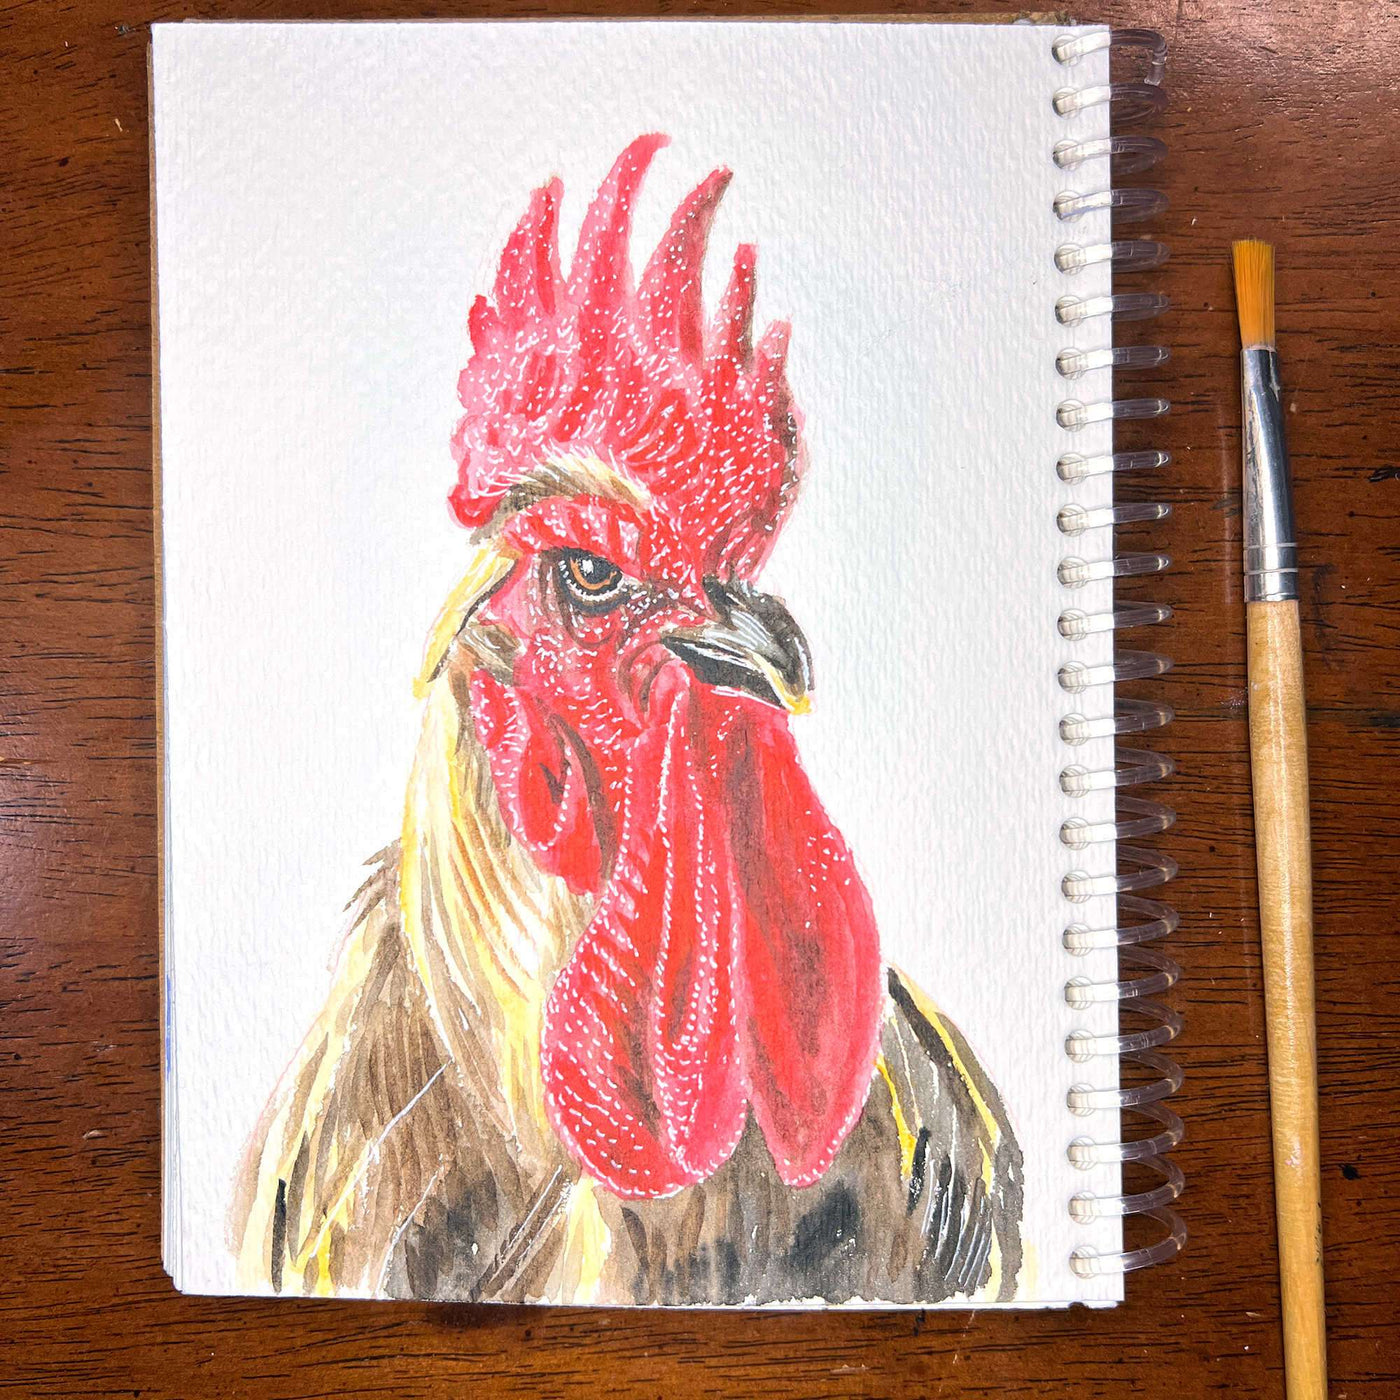 Pigeon/Rooster - Original Watercolor Painting of a rooster on a spiral notebook, with a paintbrush on the right, displayed on a wooden surface.